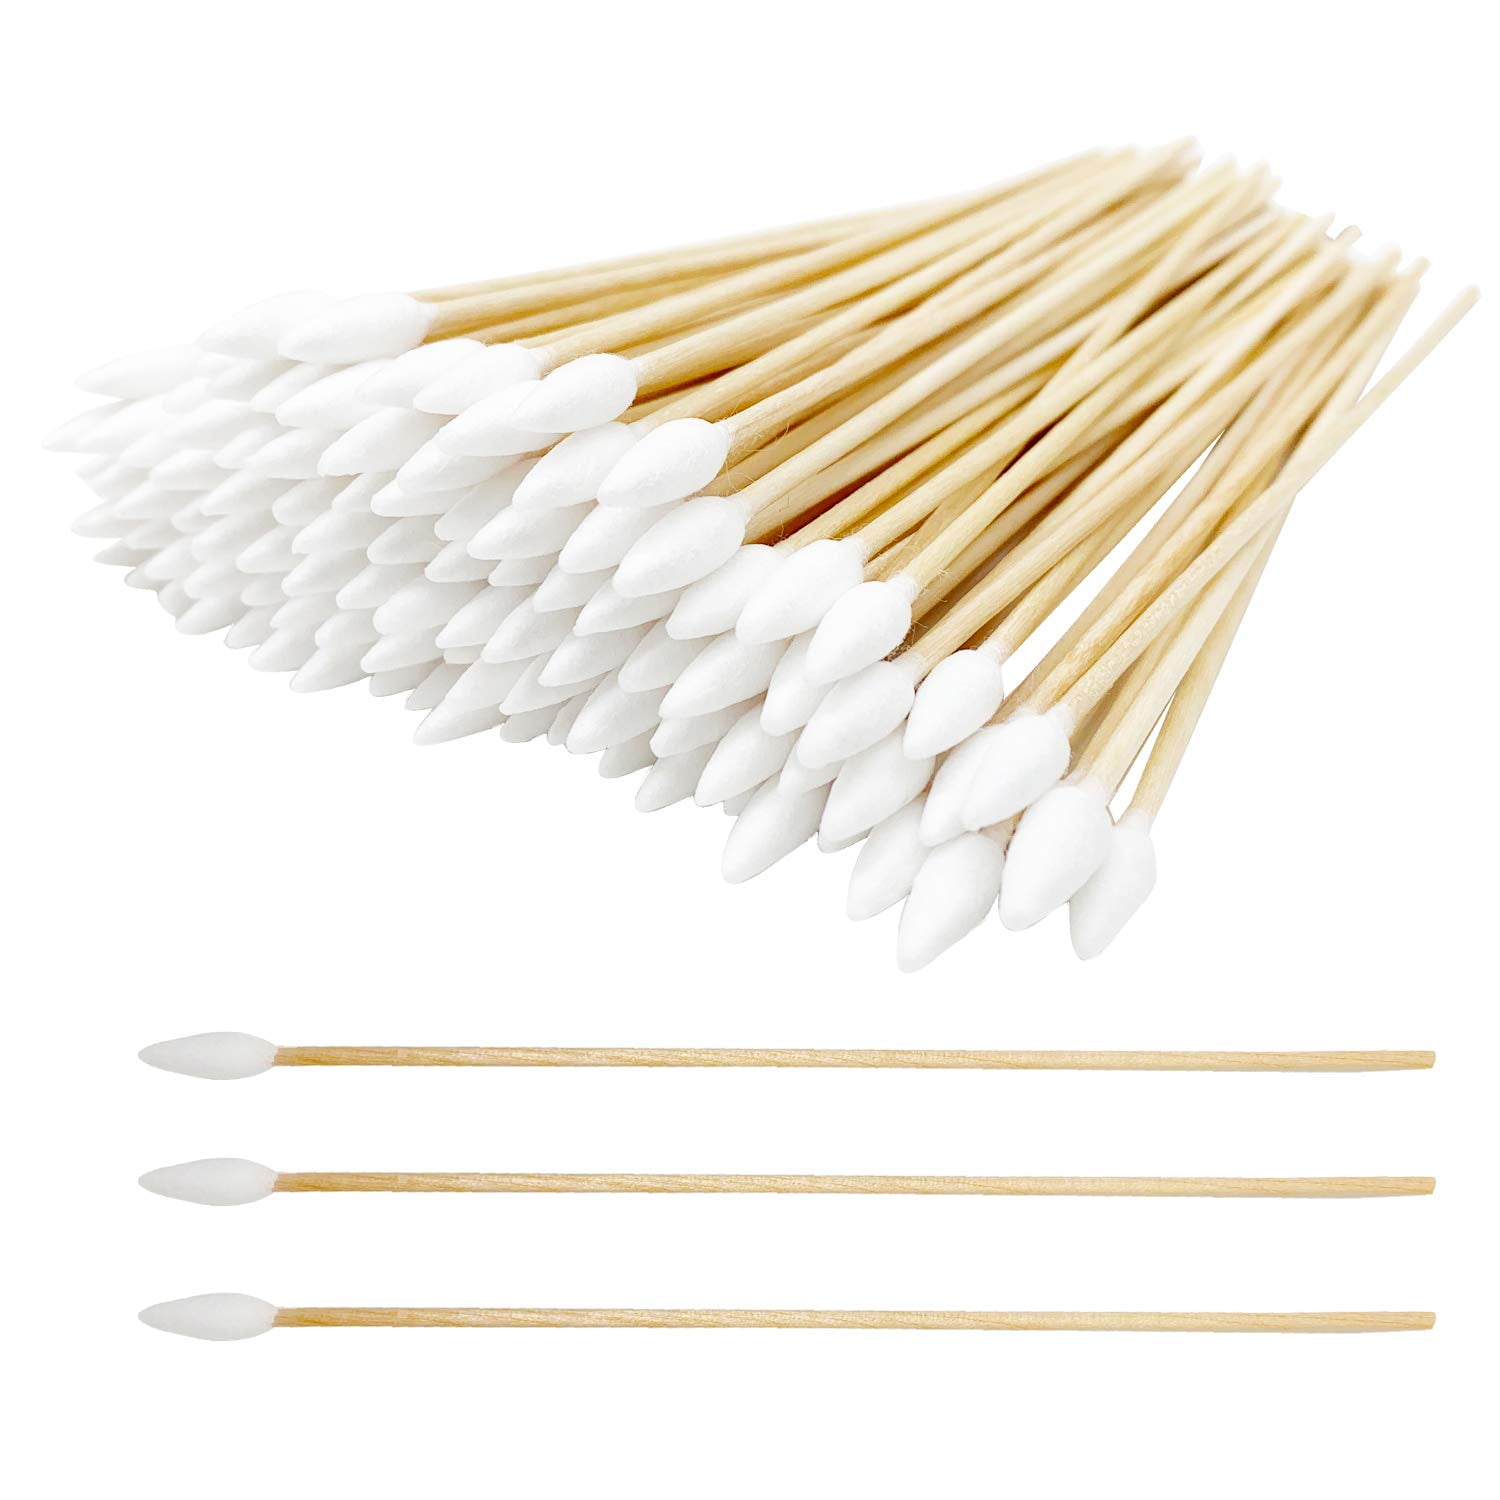 Swabs Cotton Buds Long Wooden Handle Heavy Duty Electronics Cleaning BOX OF 100 